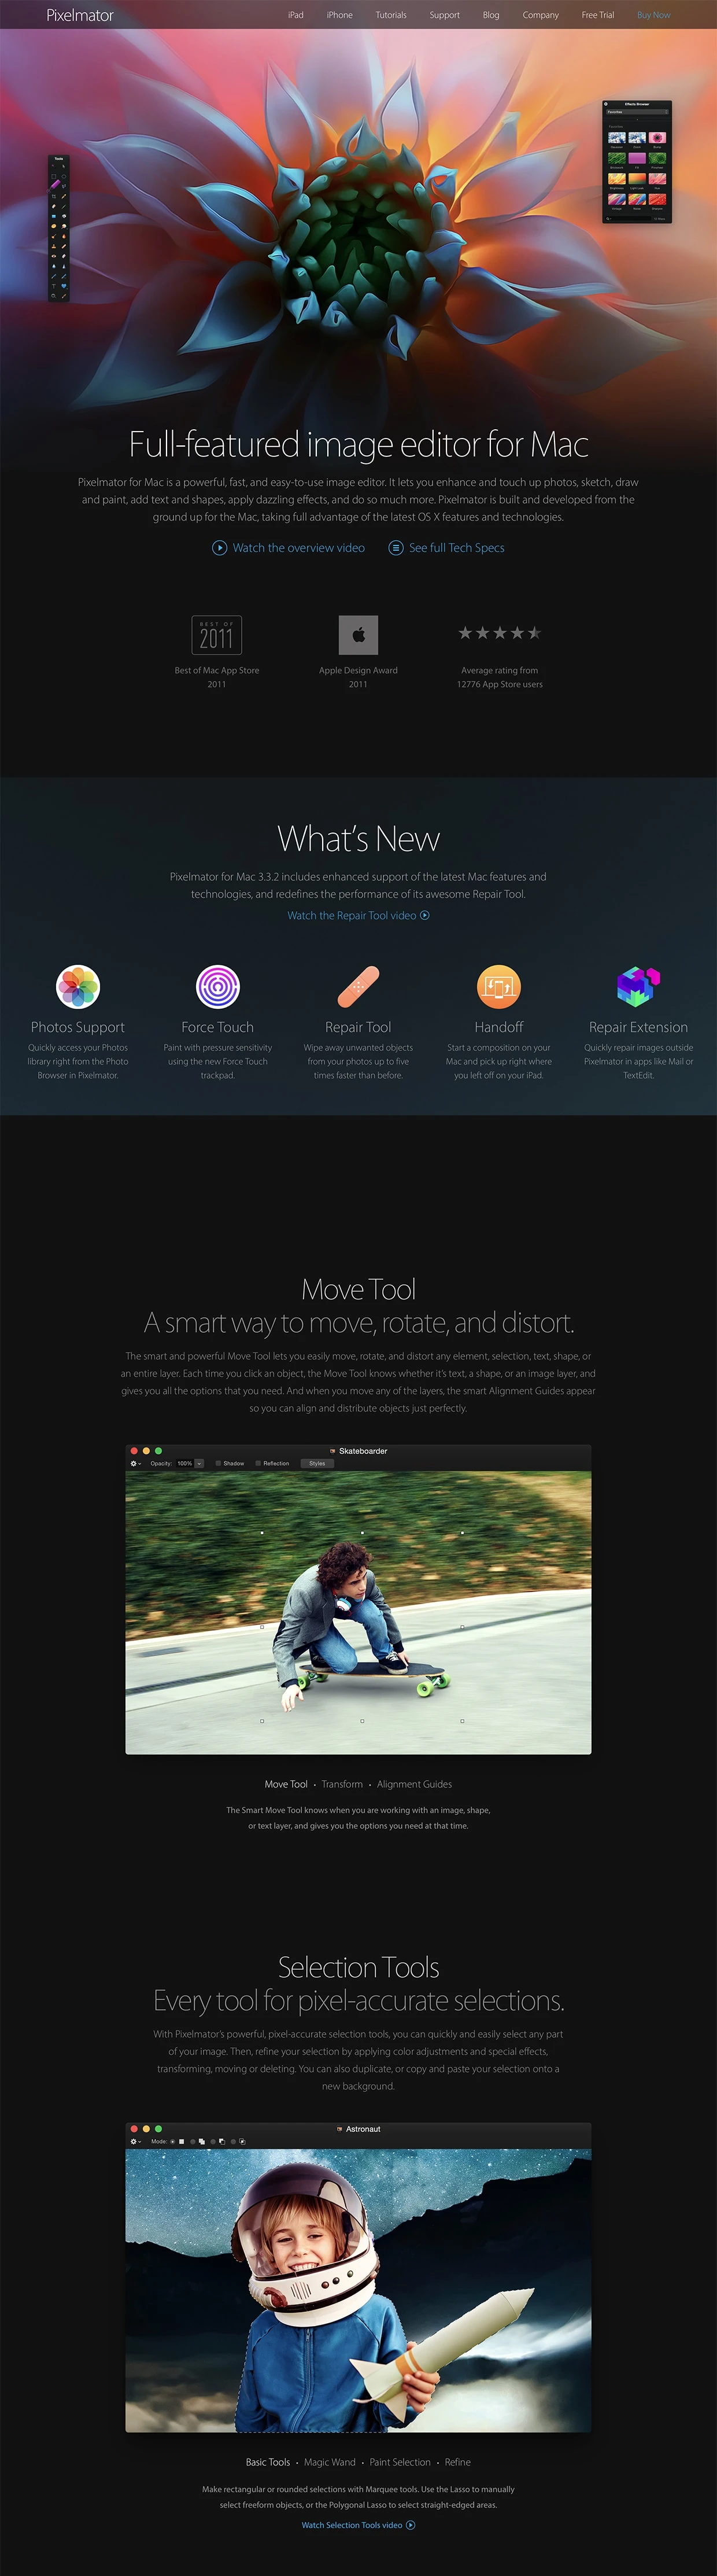 Pixelmator for Mac Landing Page Example: The world’s most innovative, fastest, full-featured, and powerful image editing app for the Mac that has everything you need to create and edit your images.